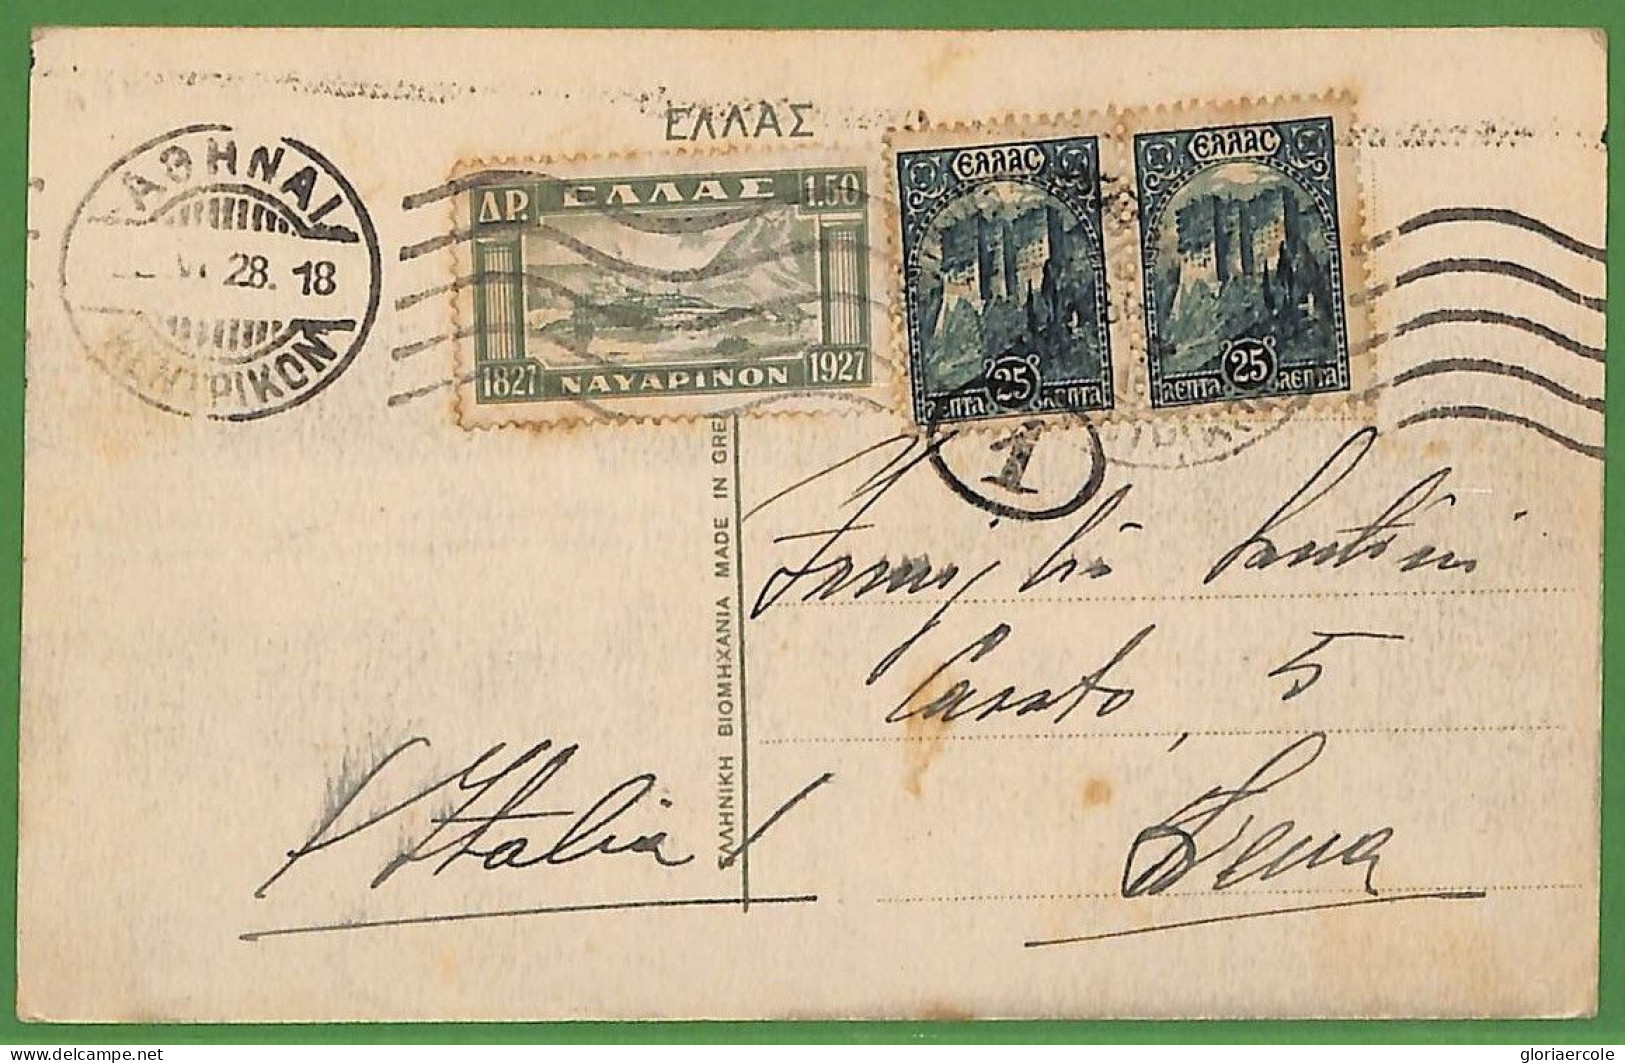 Ad0891 - GREECE - Postal History -  POSTCARD To ITALY 1928 - Covers & Documents